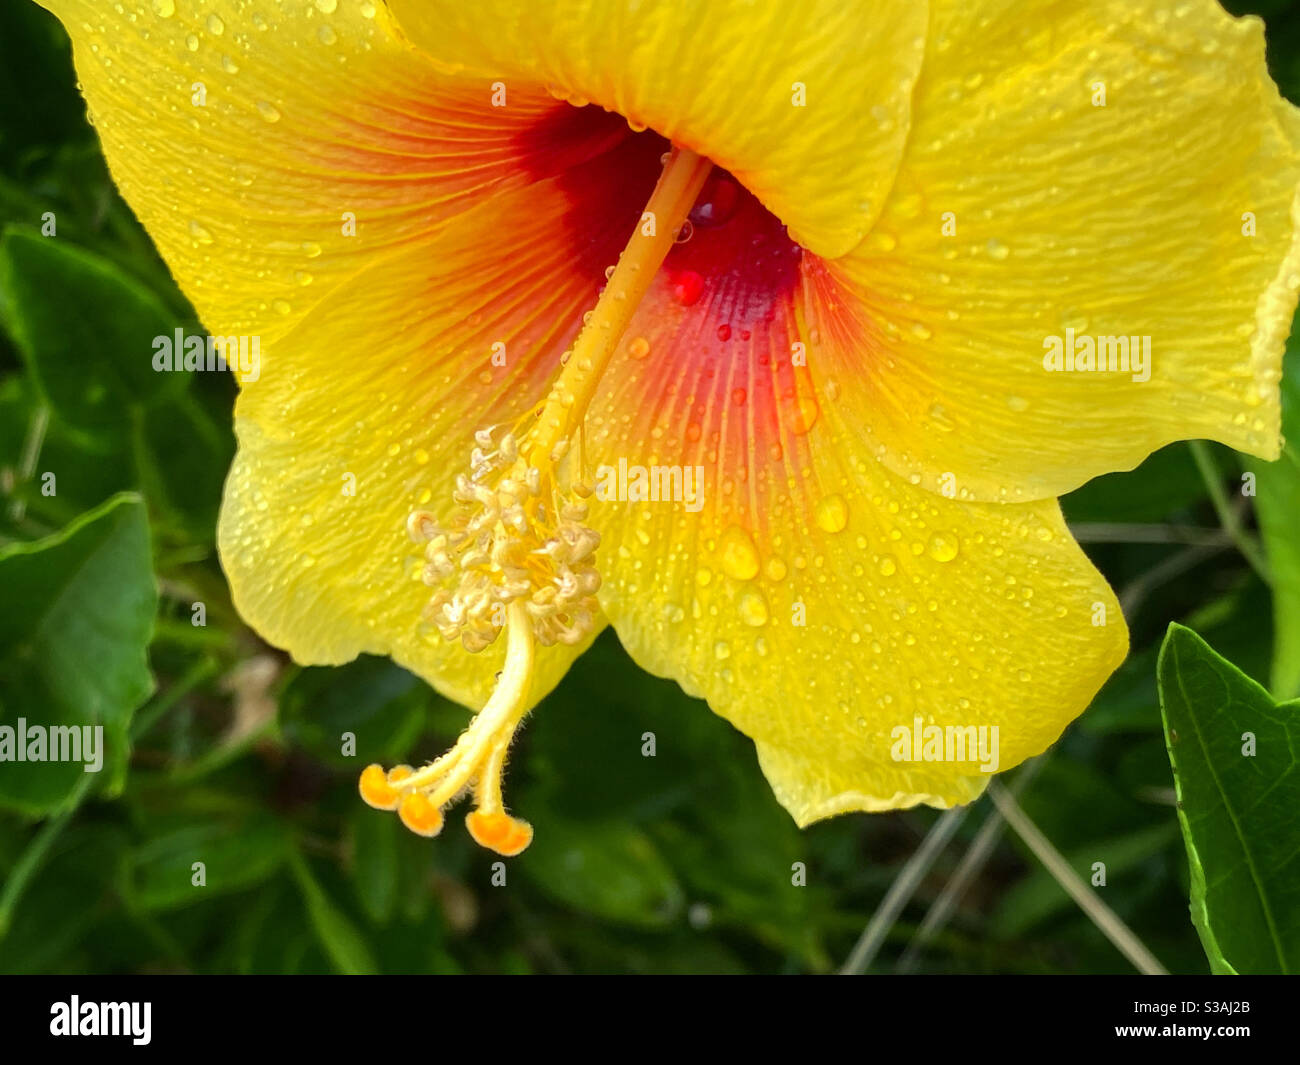 The Yellow Hibiscus: Hawaii's State Flower - Travel to Paradise